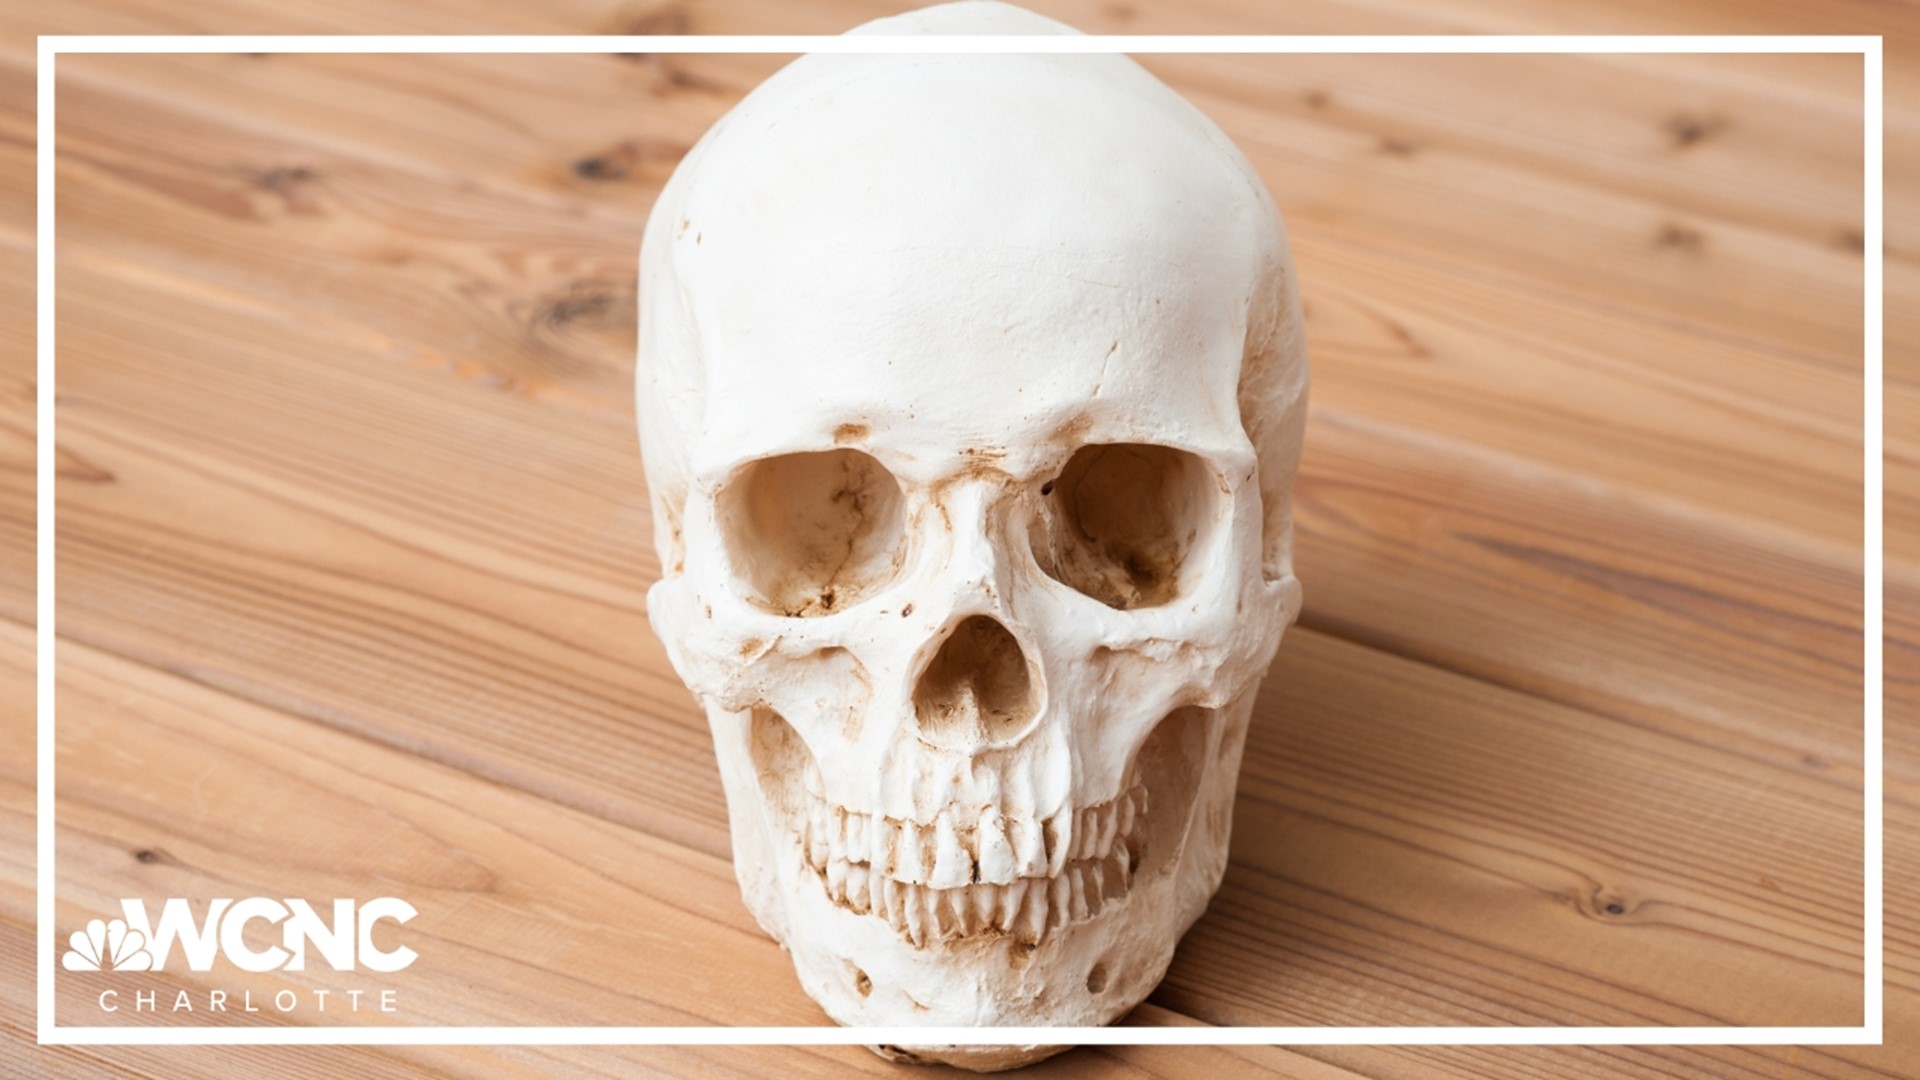 A Florida anthropologist found a real human skull in the Halloween section of a thrift store.